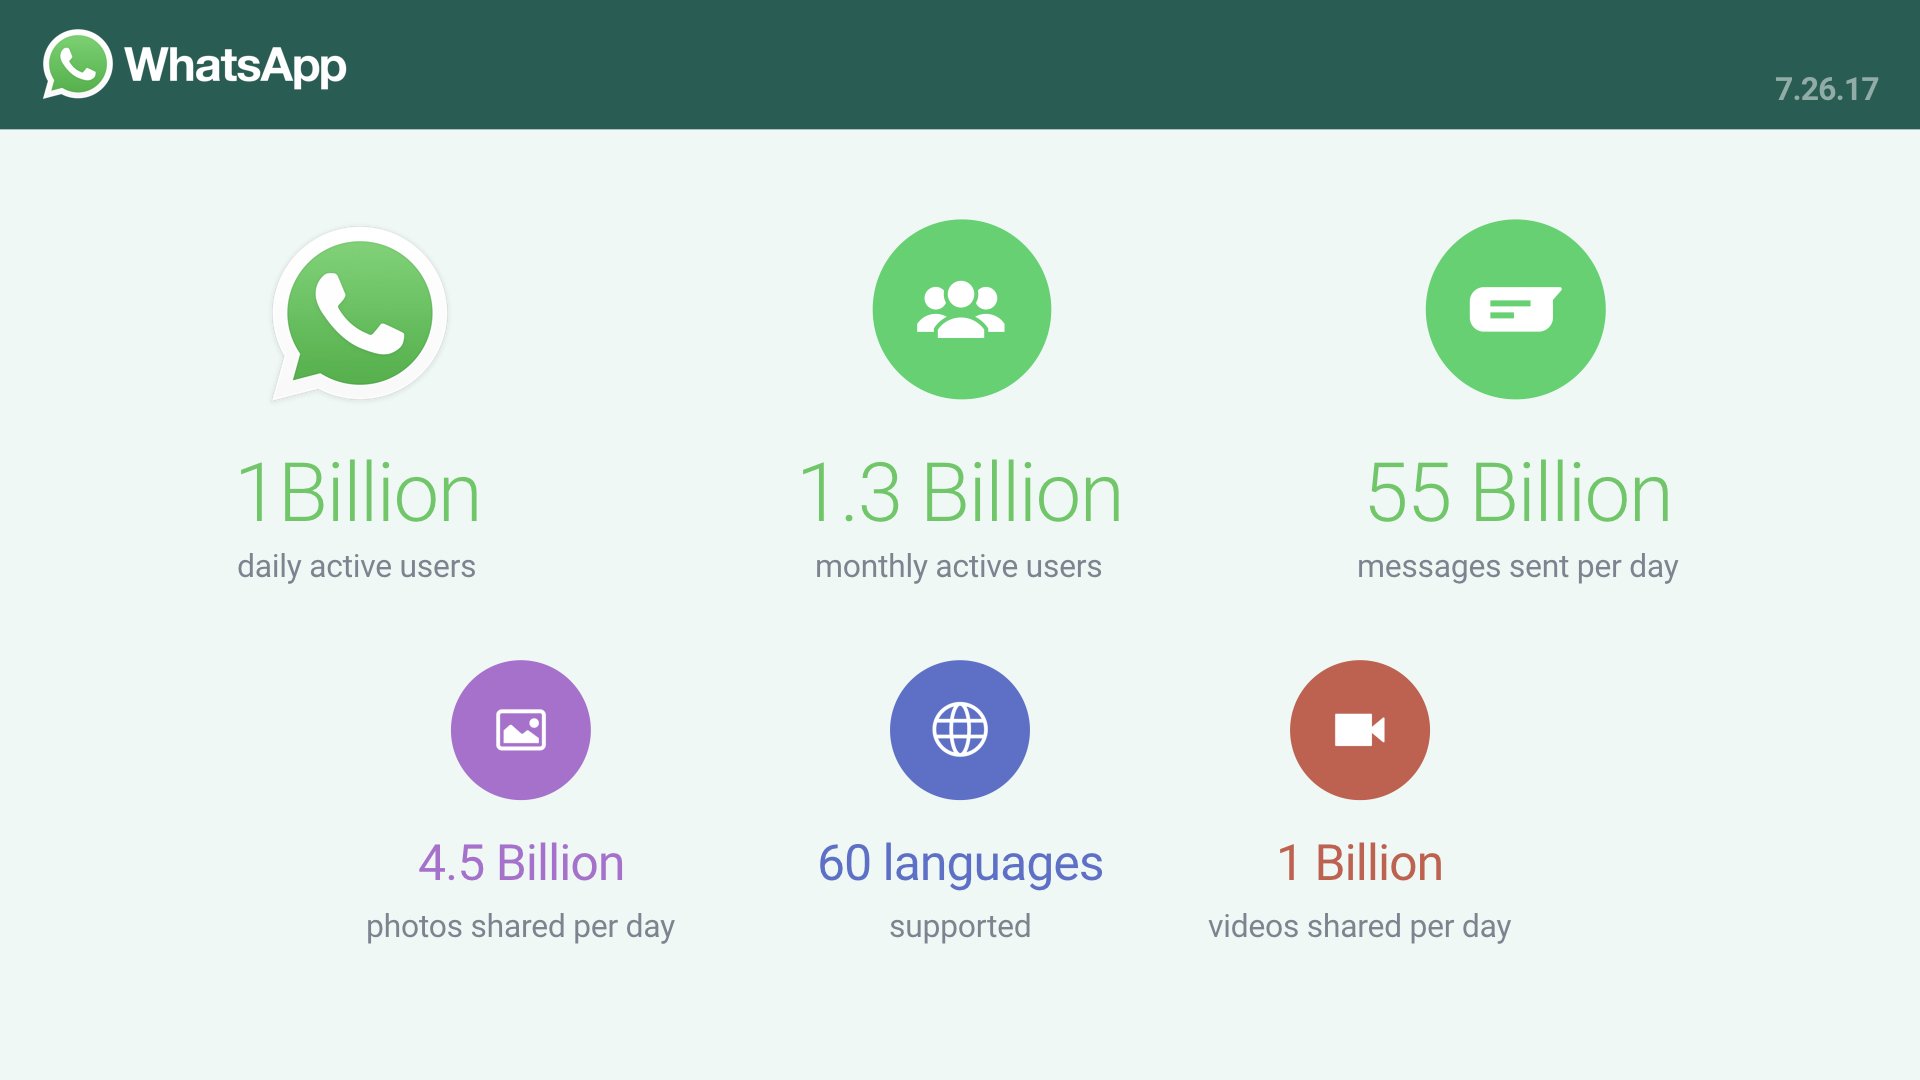 WhatsApp achieved 1 billion Daily Active Users, 55bn sent messages & 4.5bn photographs